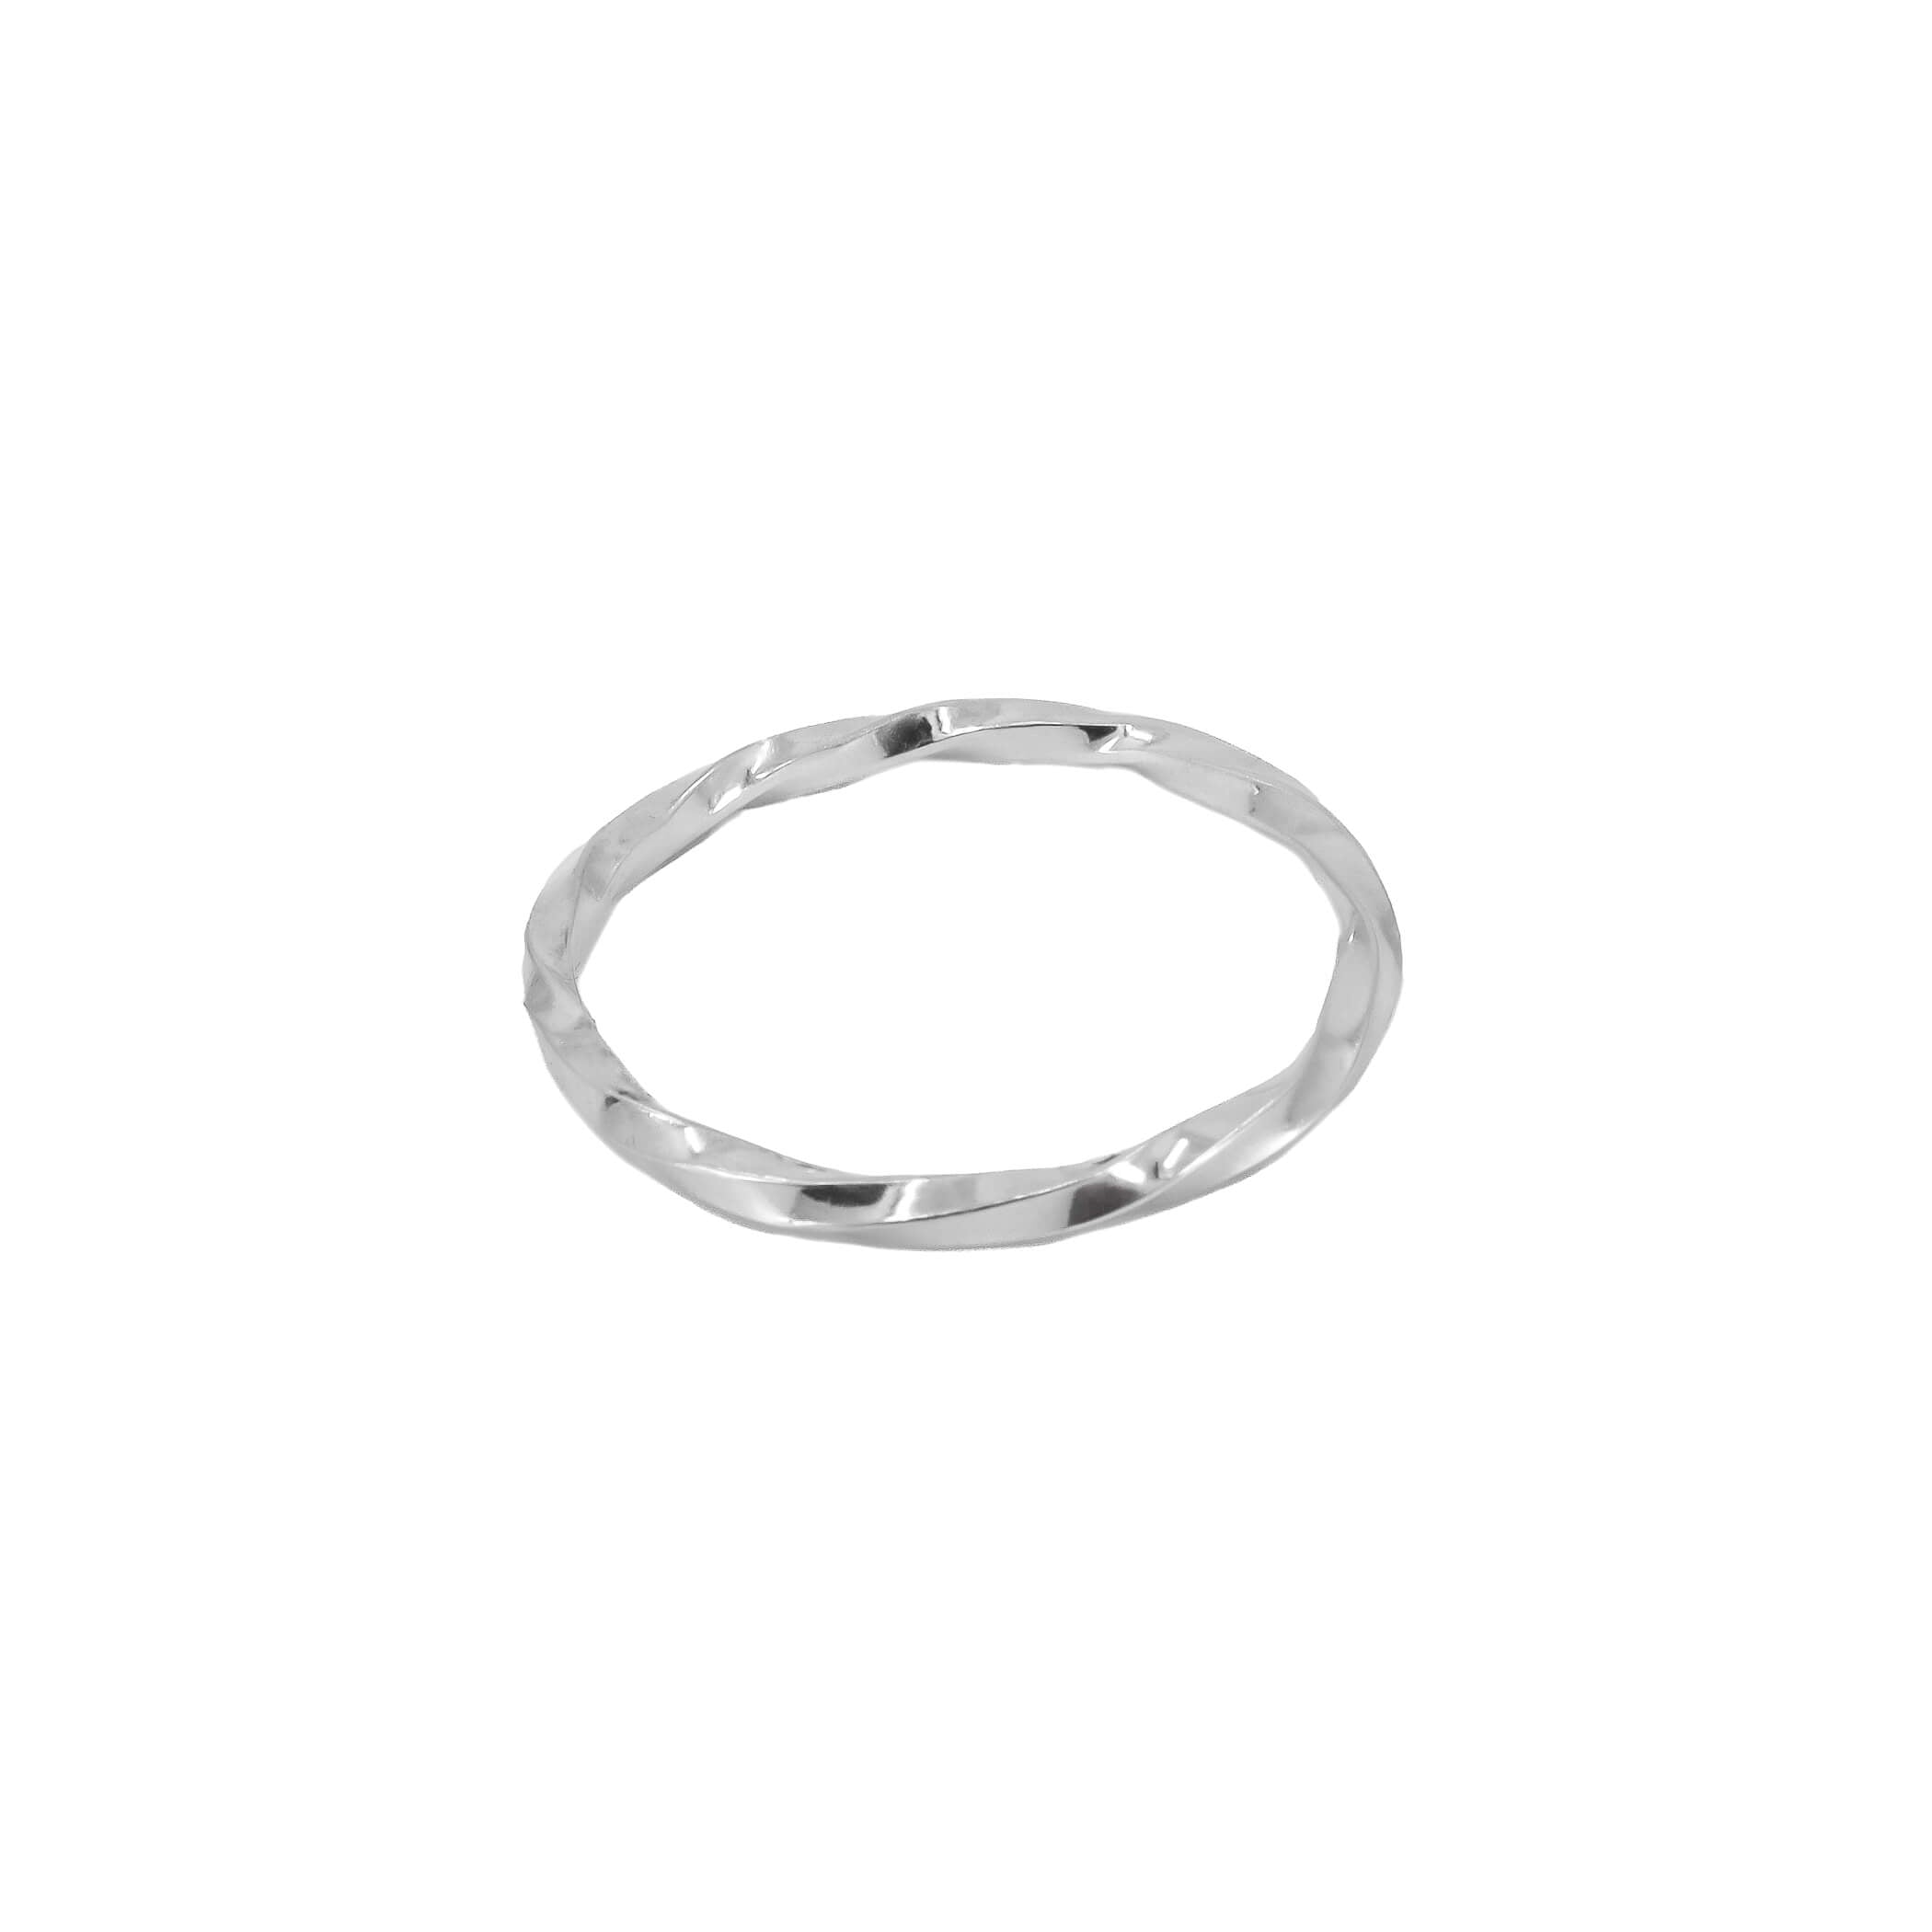 Rope sterling silver stacking ring